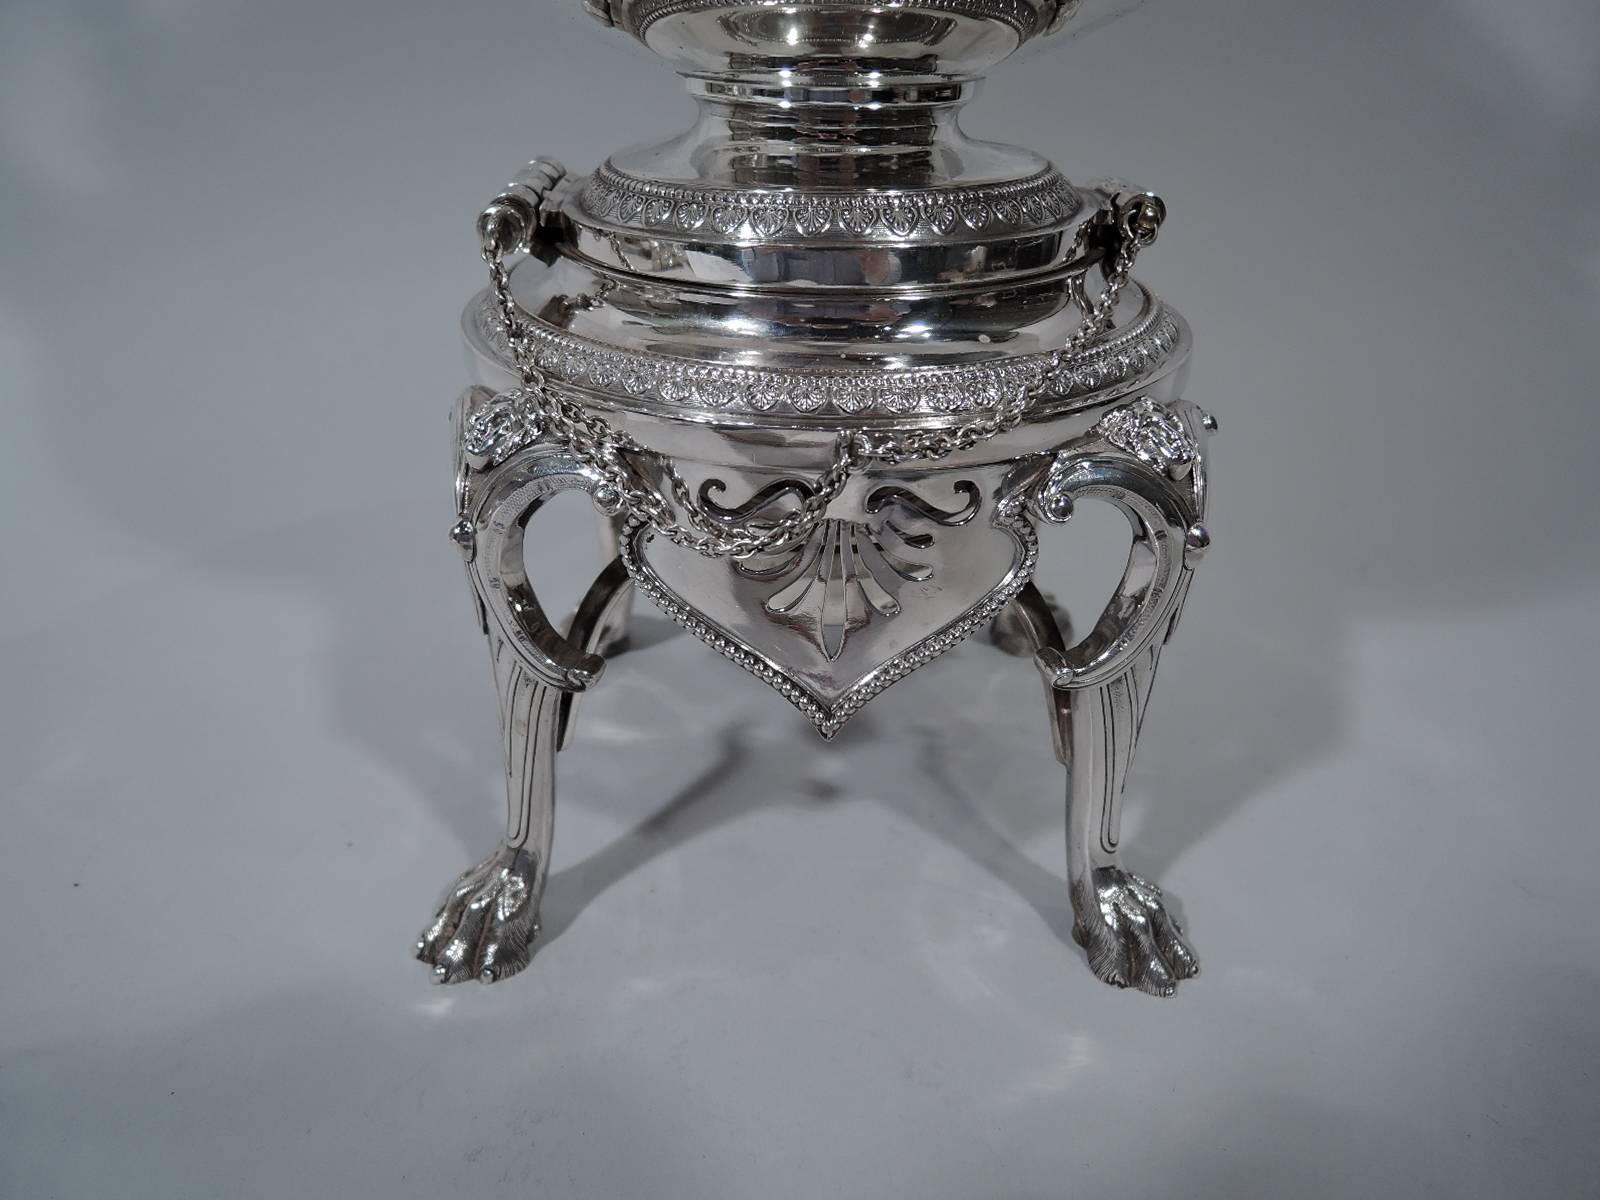 19th Century Early Tiffany Sterling Silver Hot Water Kettle on Stand 